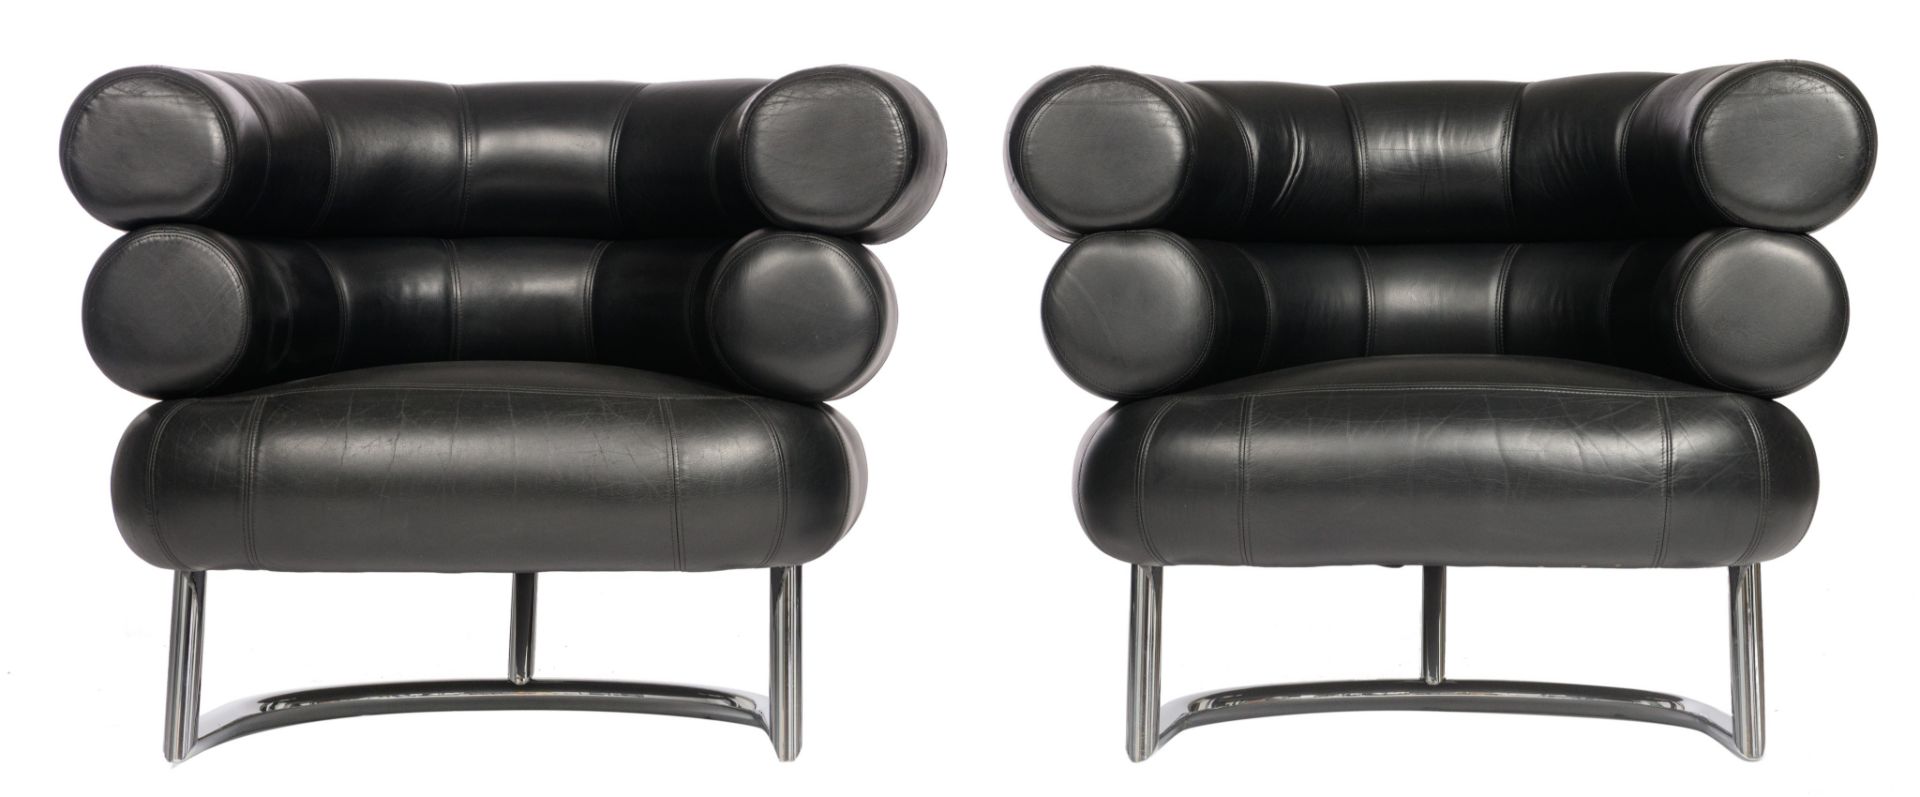 A pair of vintage 'Bibendum chair', designed by Eileen Grey in 1921, H 70 - W 92 cm - Image 2 of 9